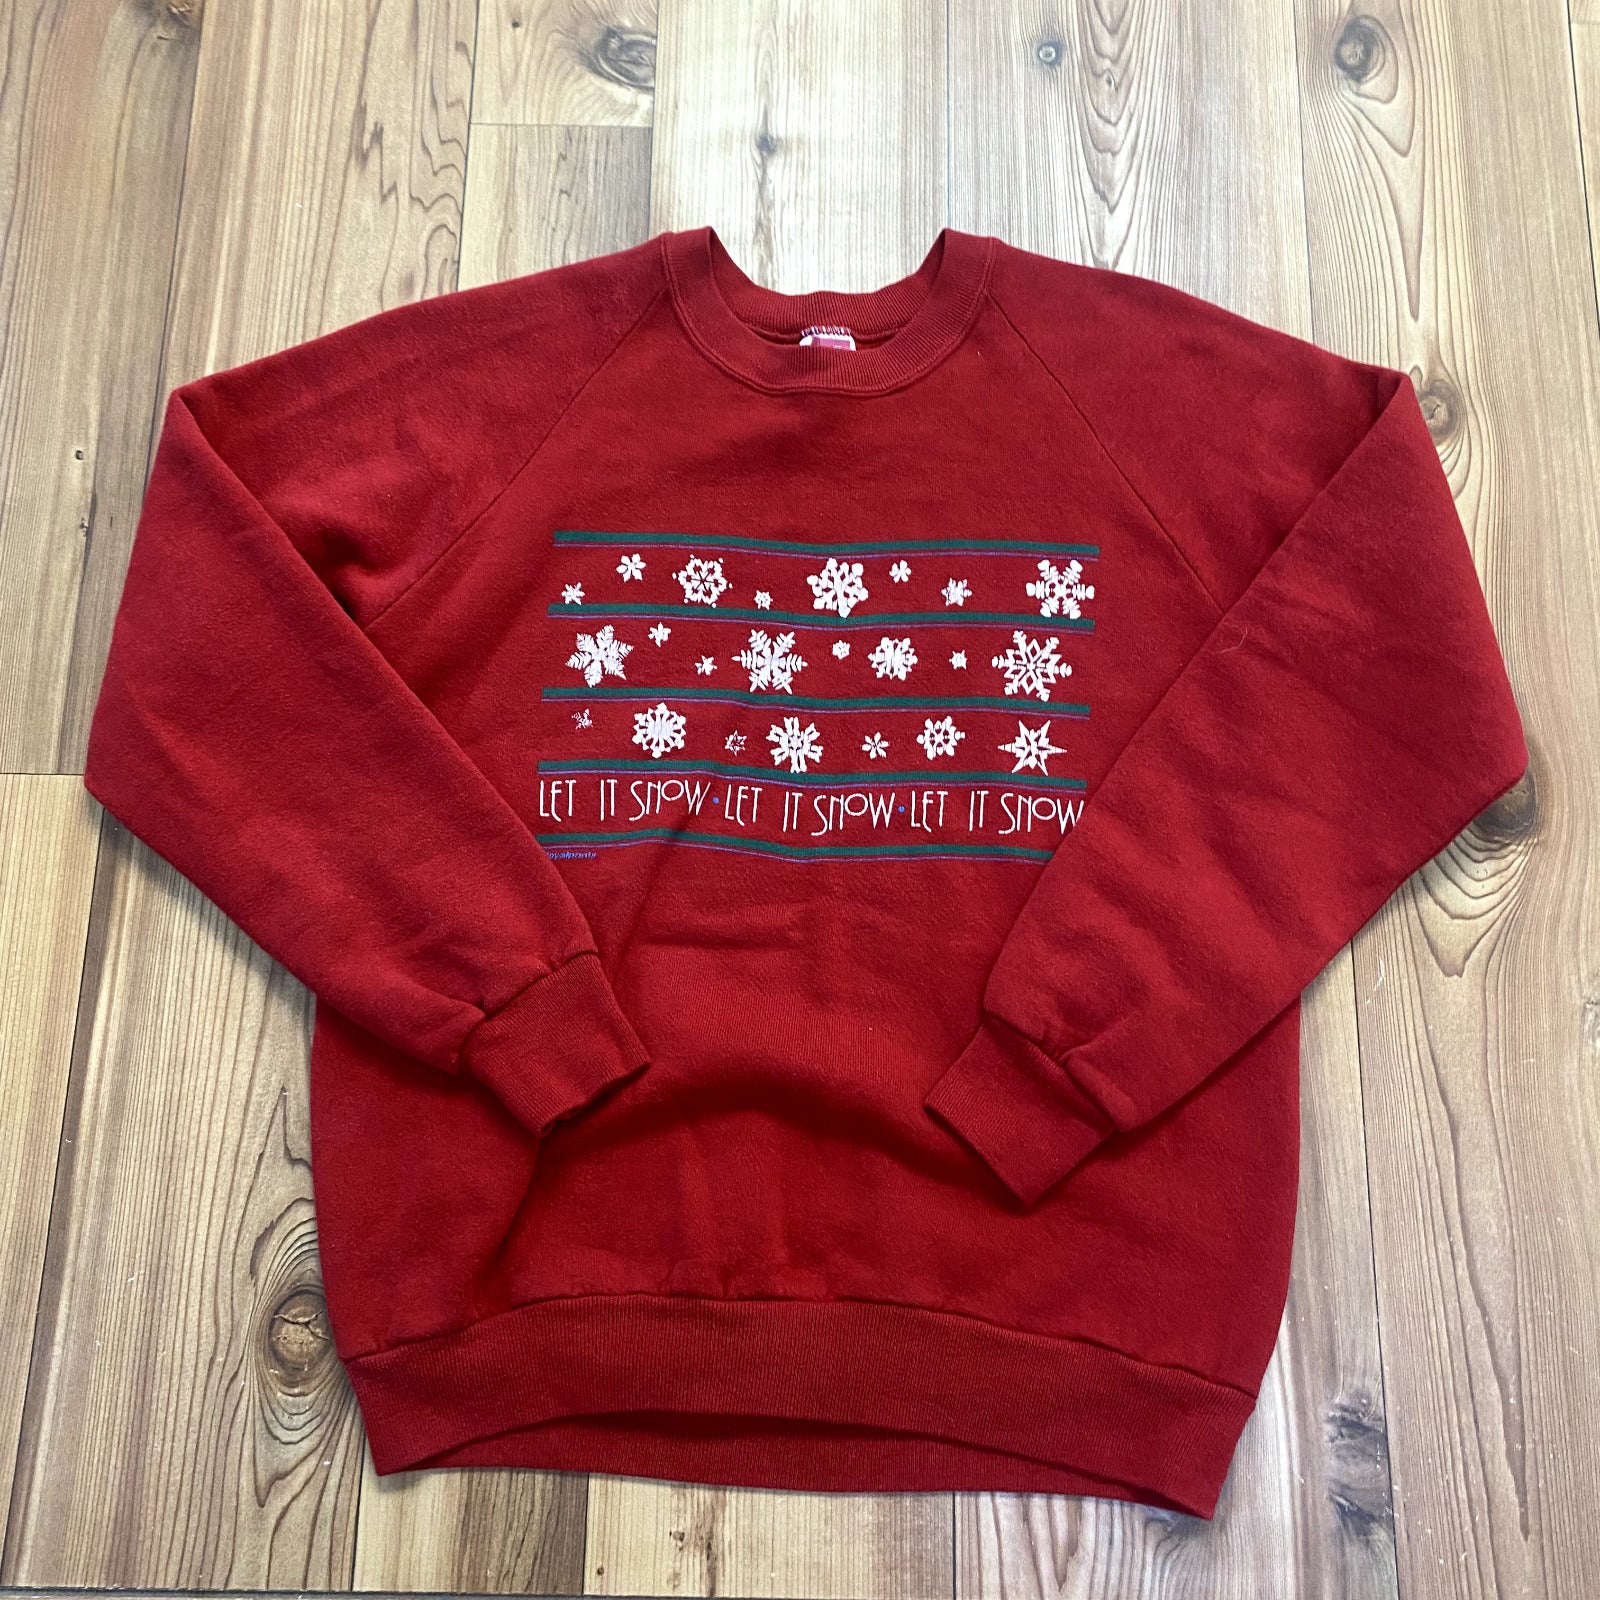 Vintage Jerzees Red Pullover Let Is Snow Holiday Sweatshirt Adult Size M